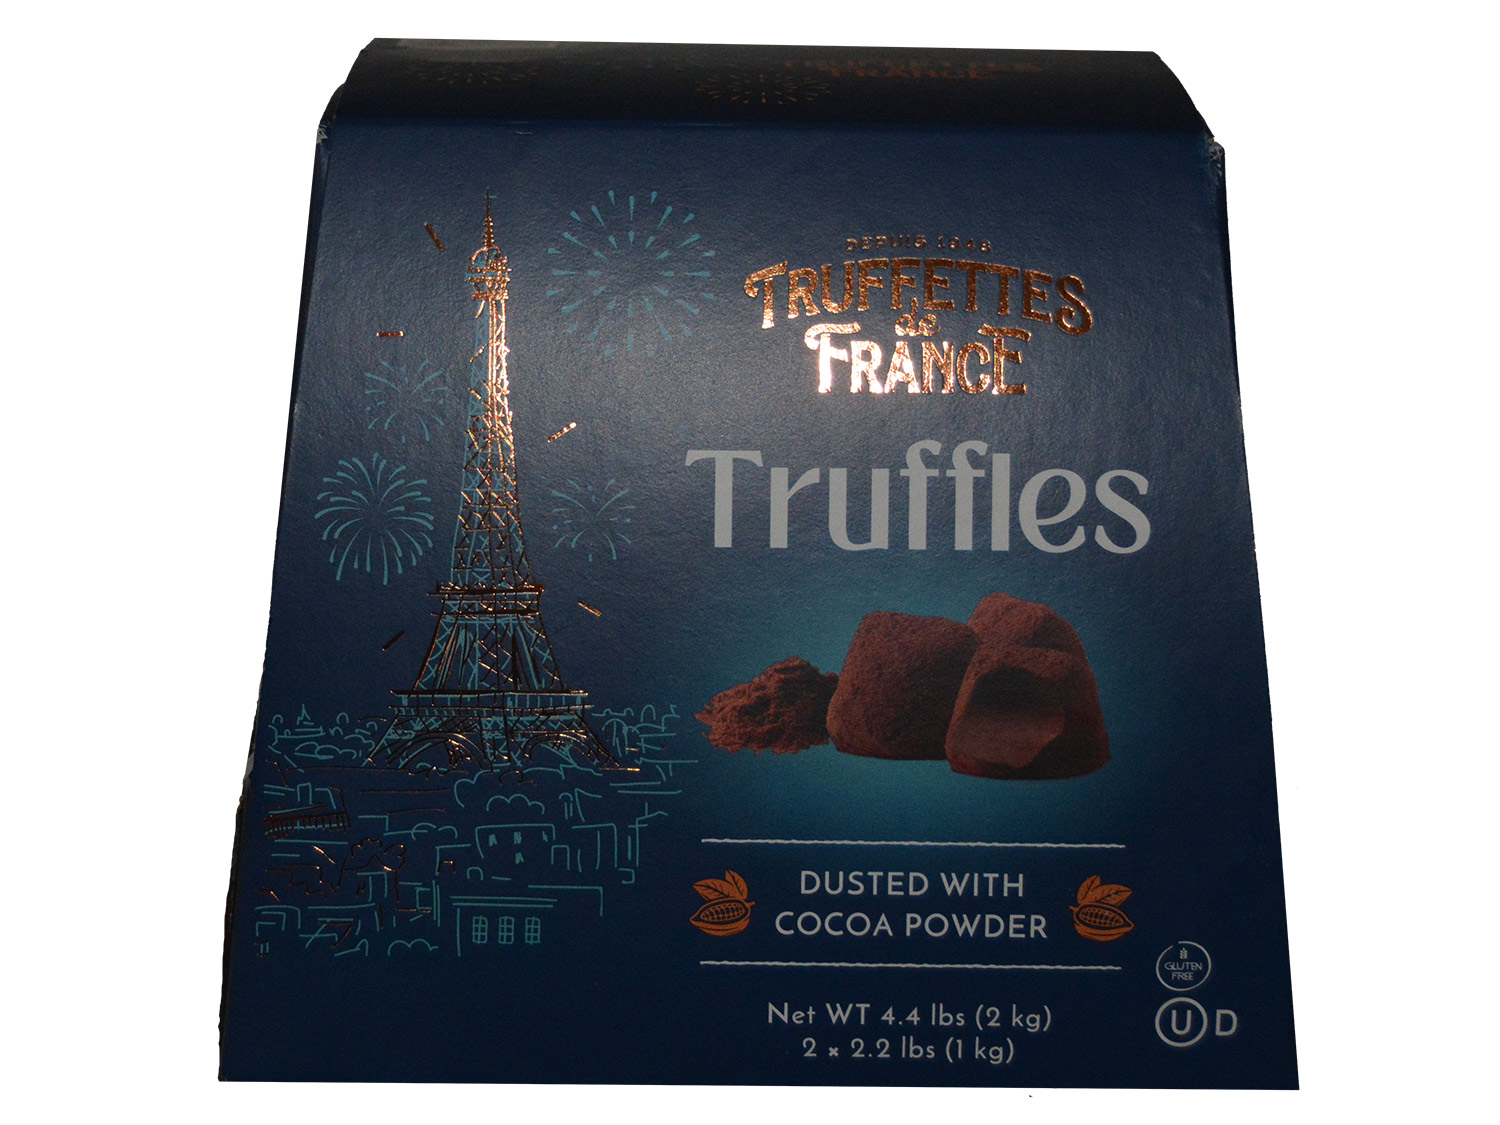 https://www.spiceplace.com/images/truffettes-defrance-truffles-2-pack-google-1500x1125.jpg